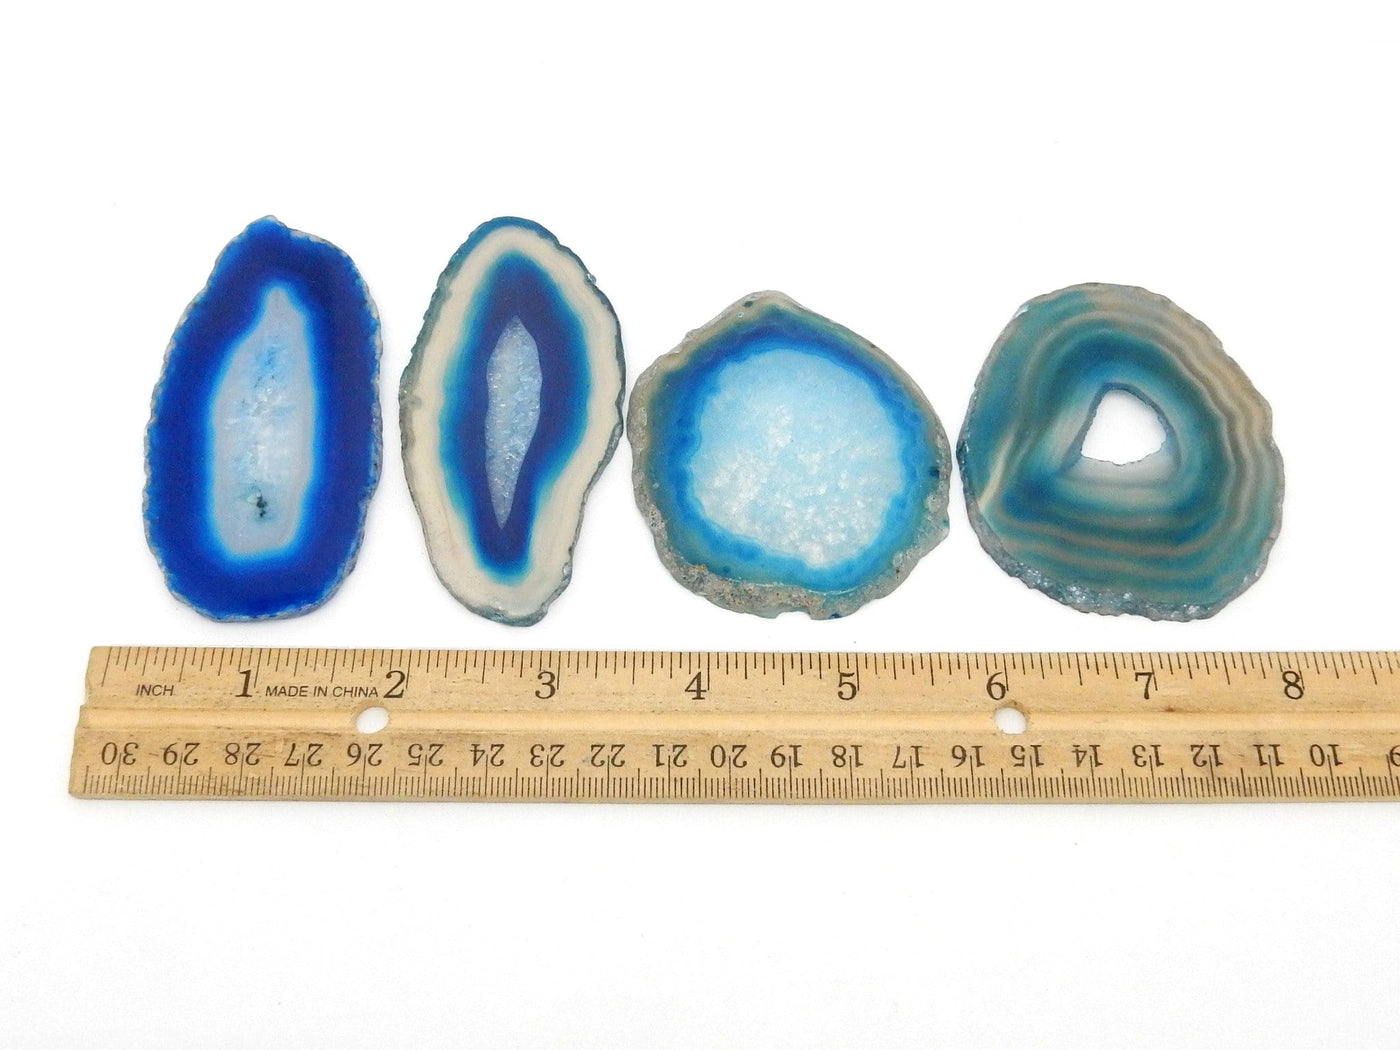 Four Blue Agate Slices lined up on a flat white surface, next to a ruler for size reference.